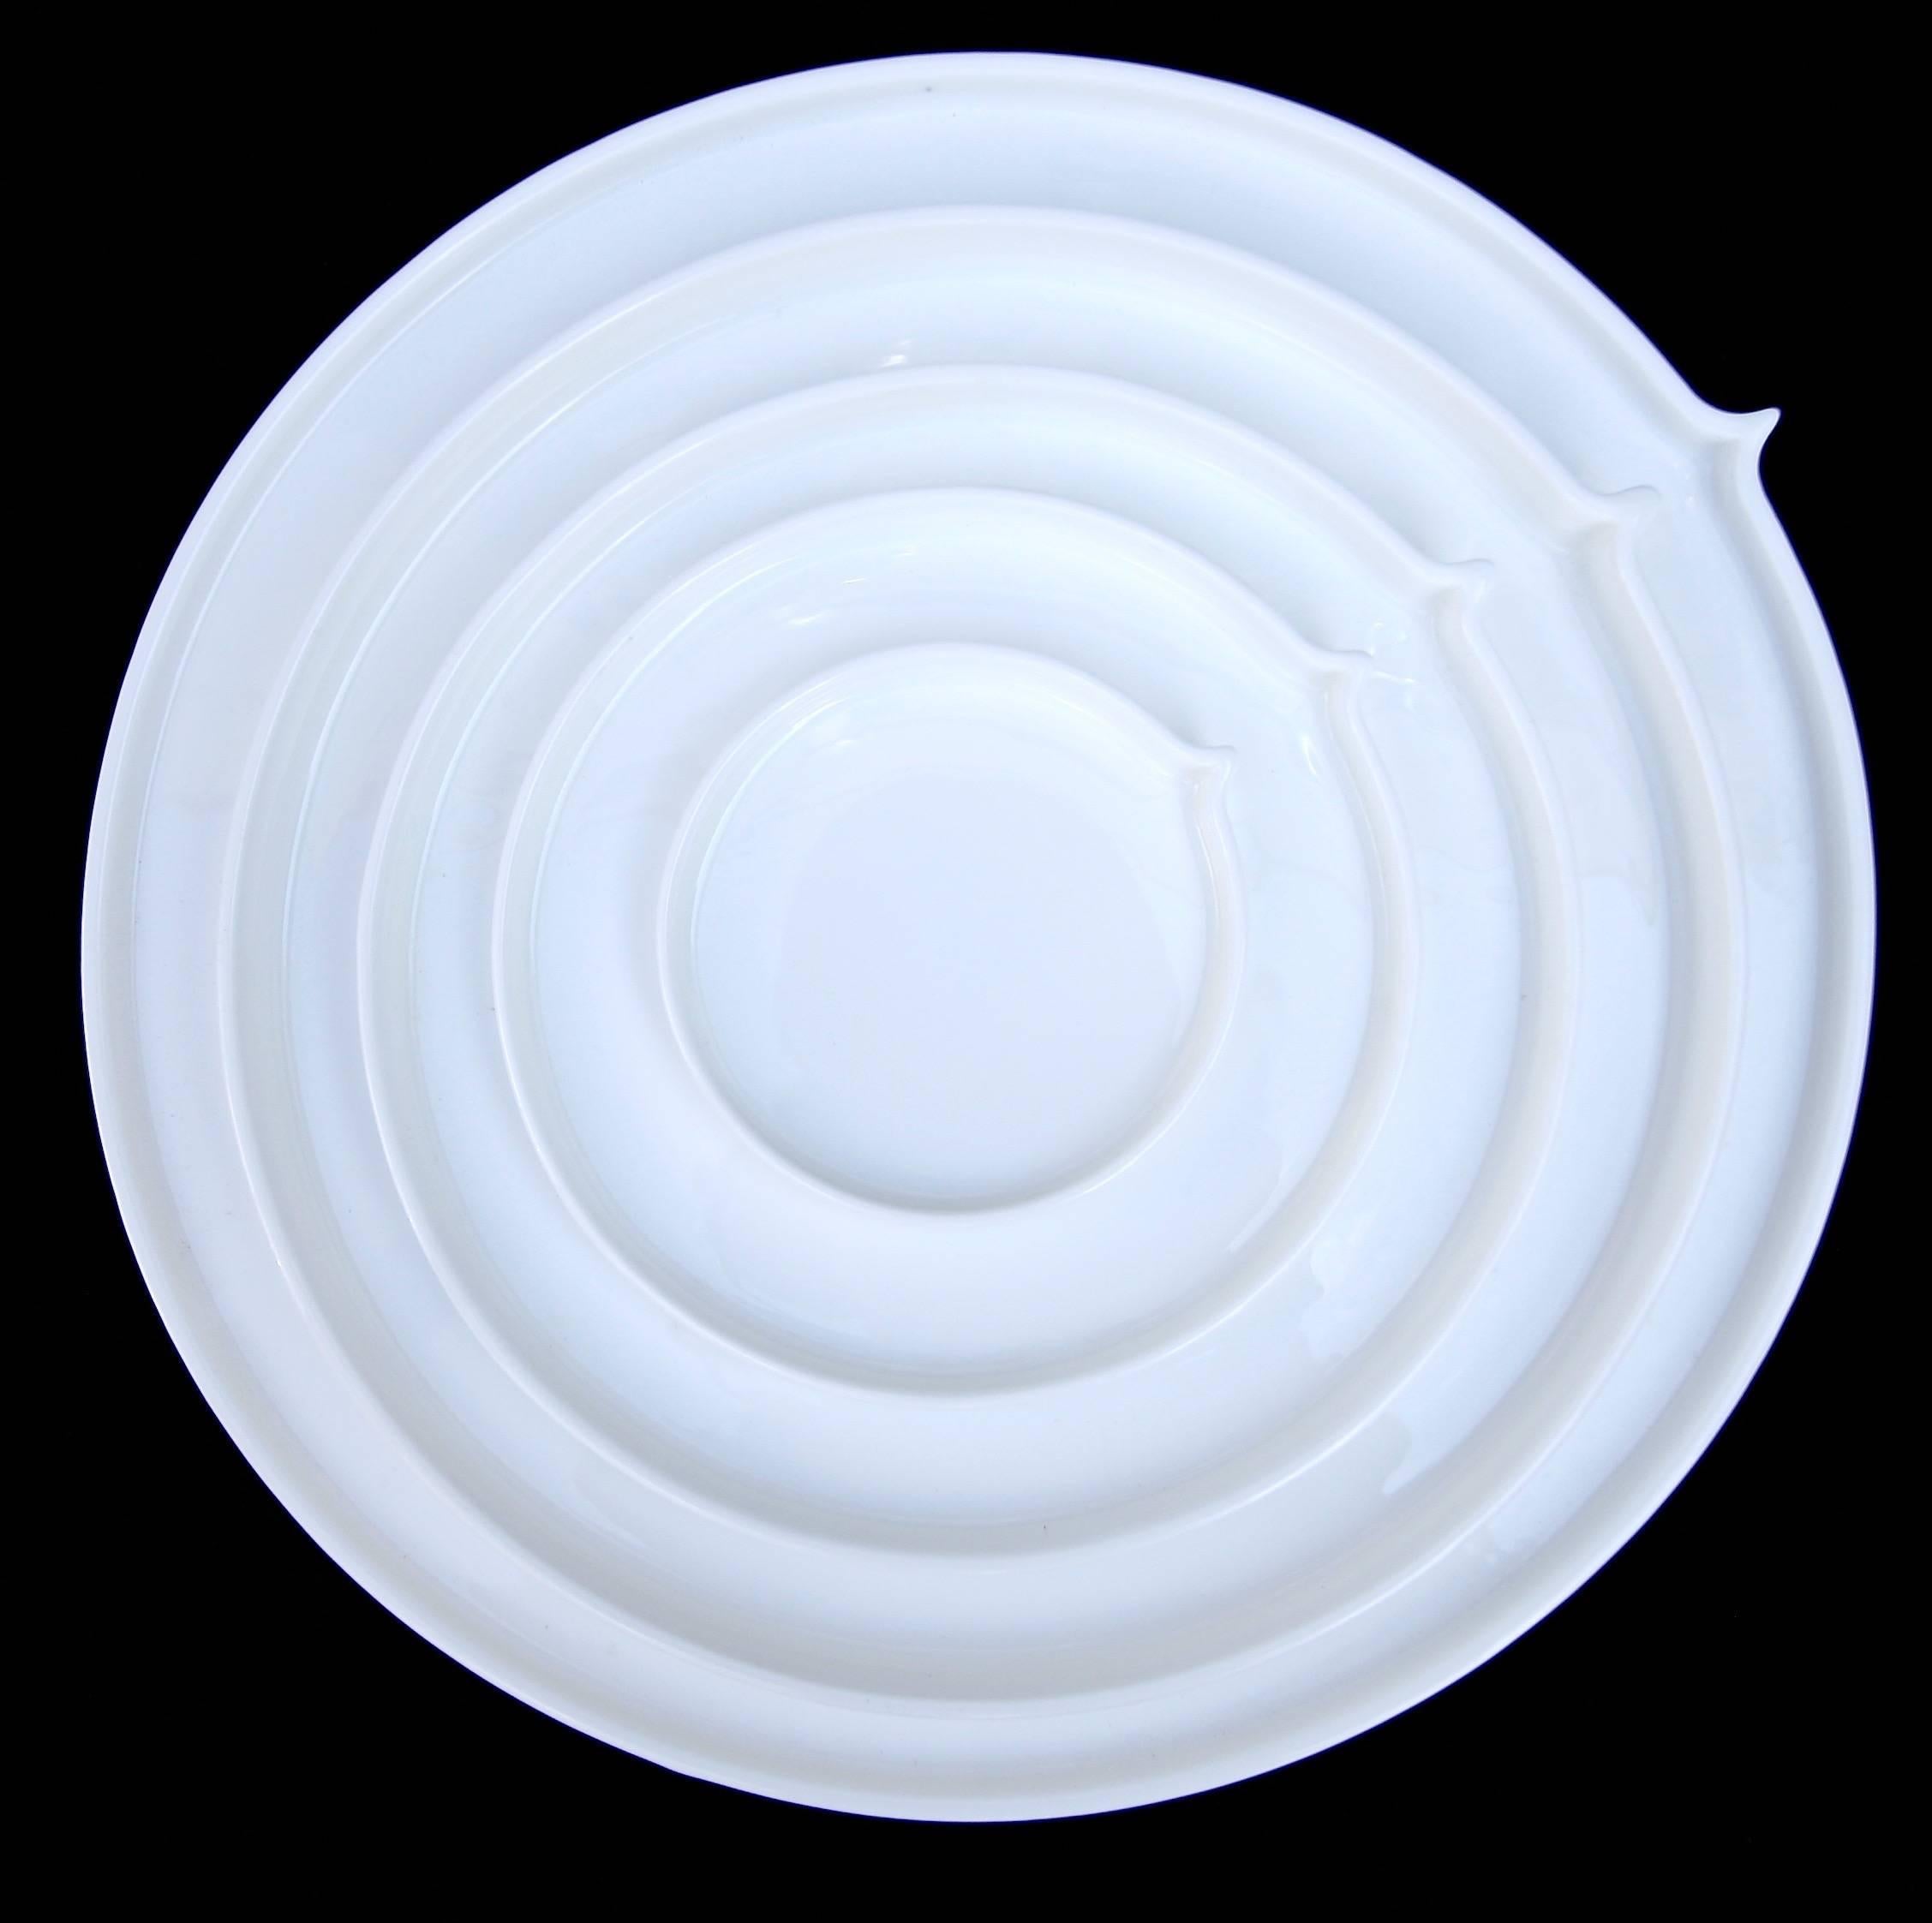 White round bone china plates by Ann Van Hoey for the line Geometry for Serax. Sold individually.

Measures: Mini $21 (3.75